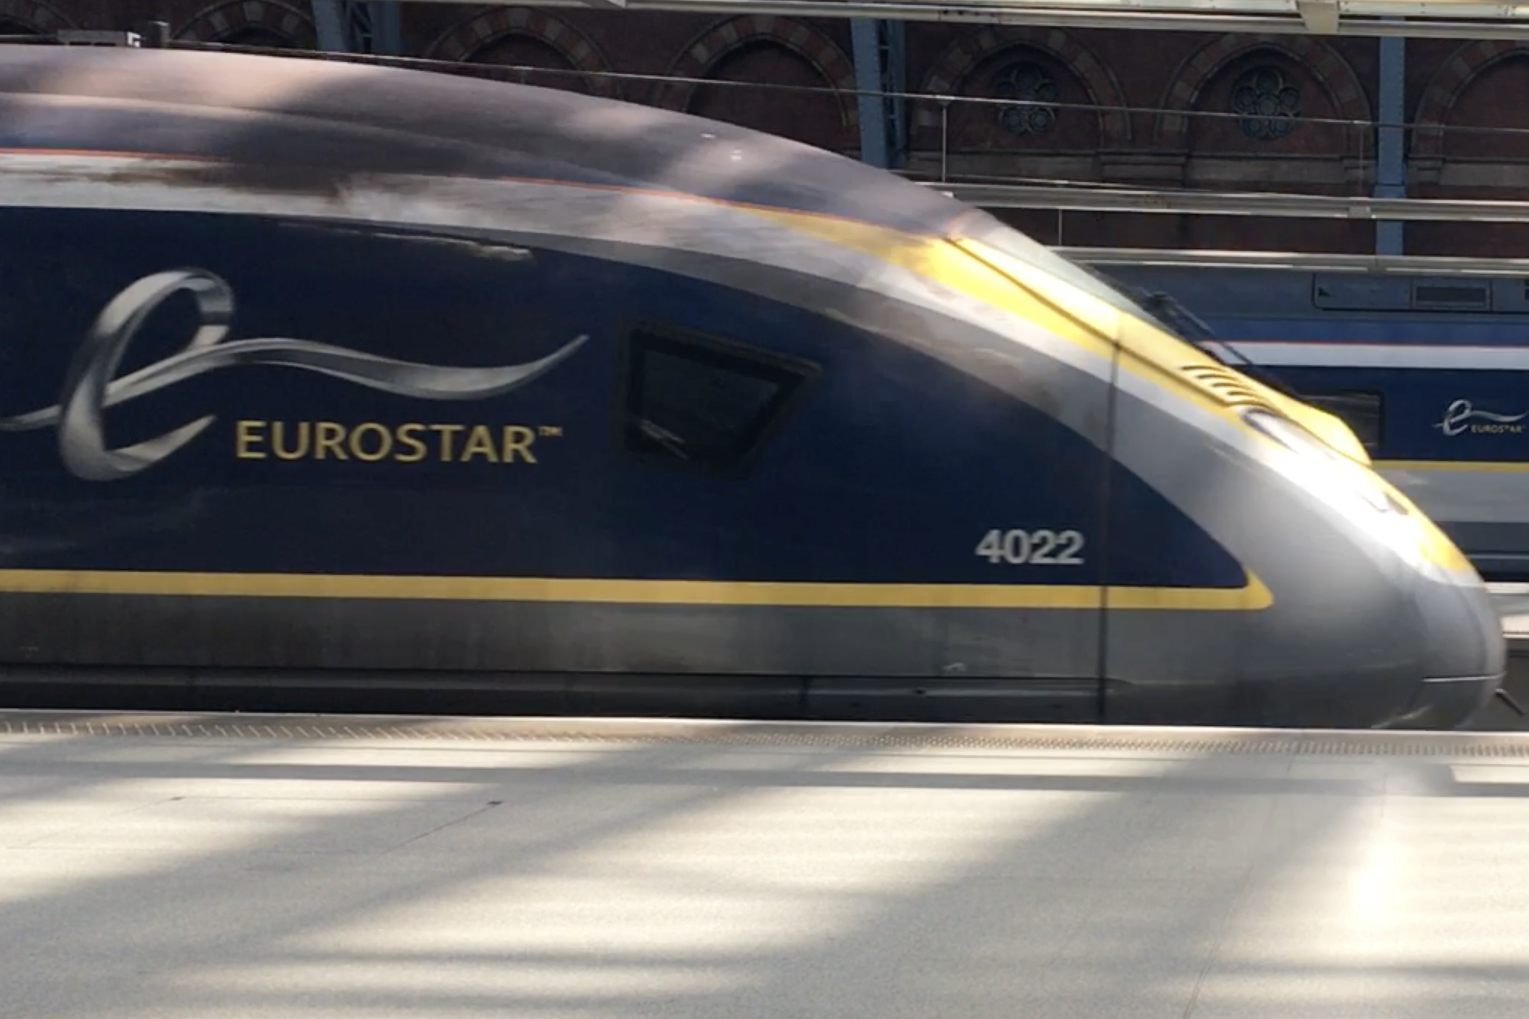 Stand still: no Eurostar trains are running to and from London St Pancras